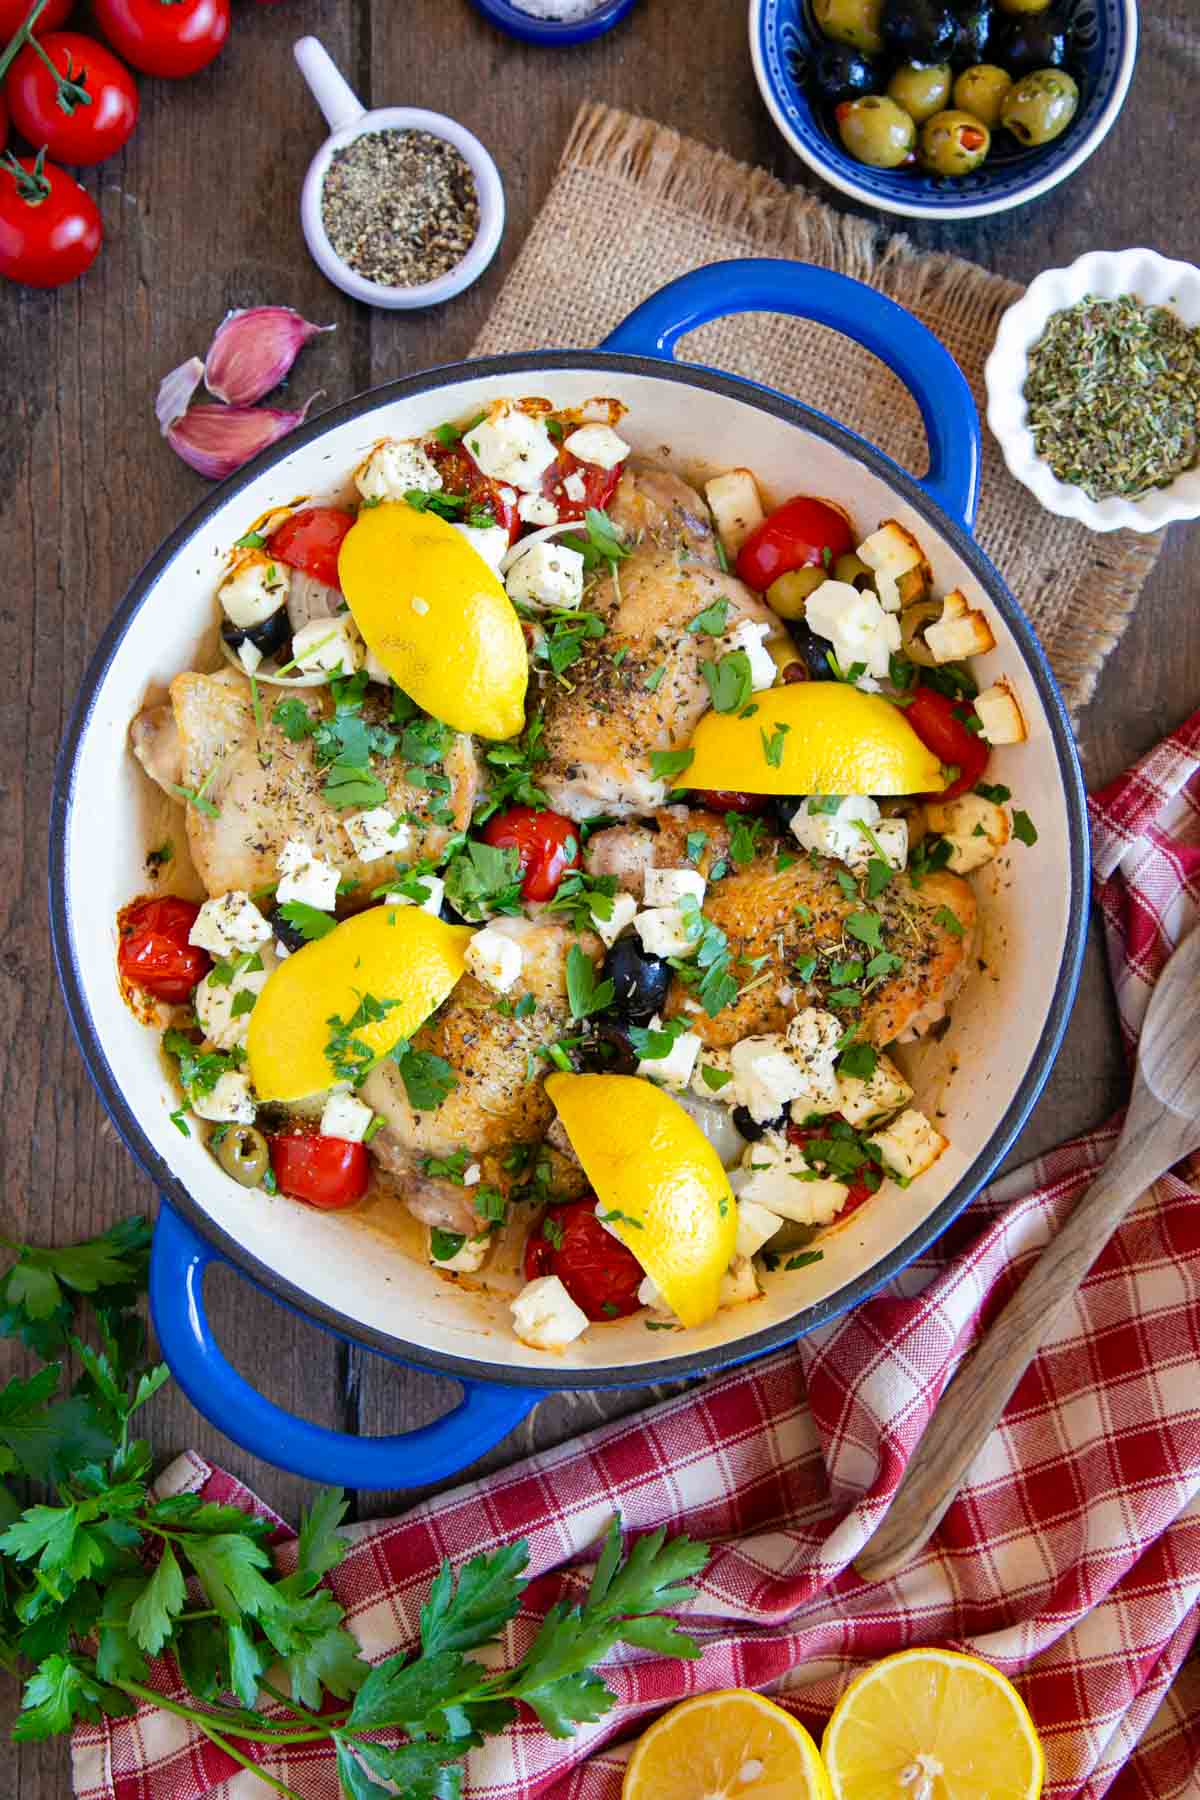 Greek chicken shown from above served up a blue casserole dish that contrasts with the bright colours of the dish.